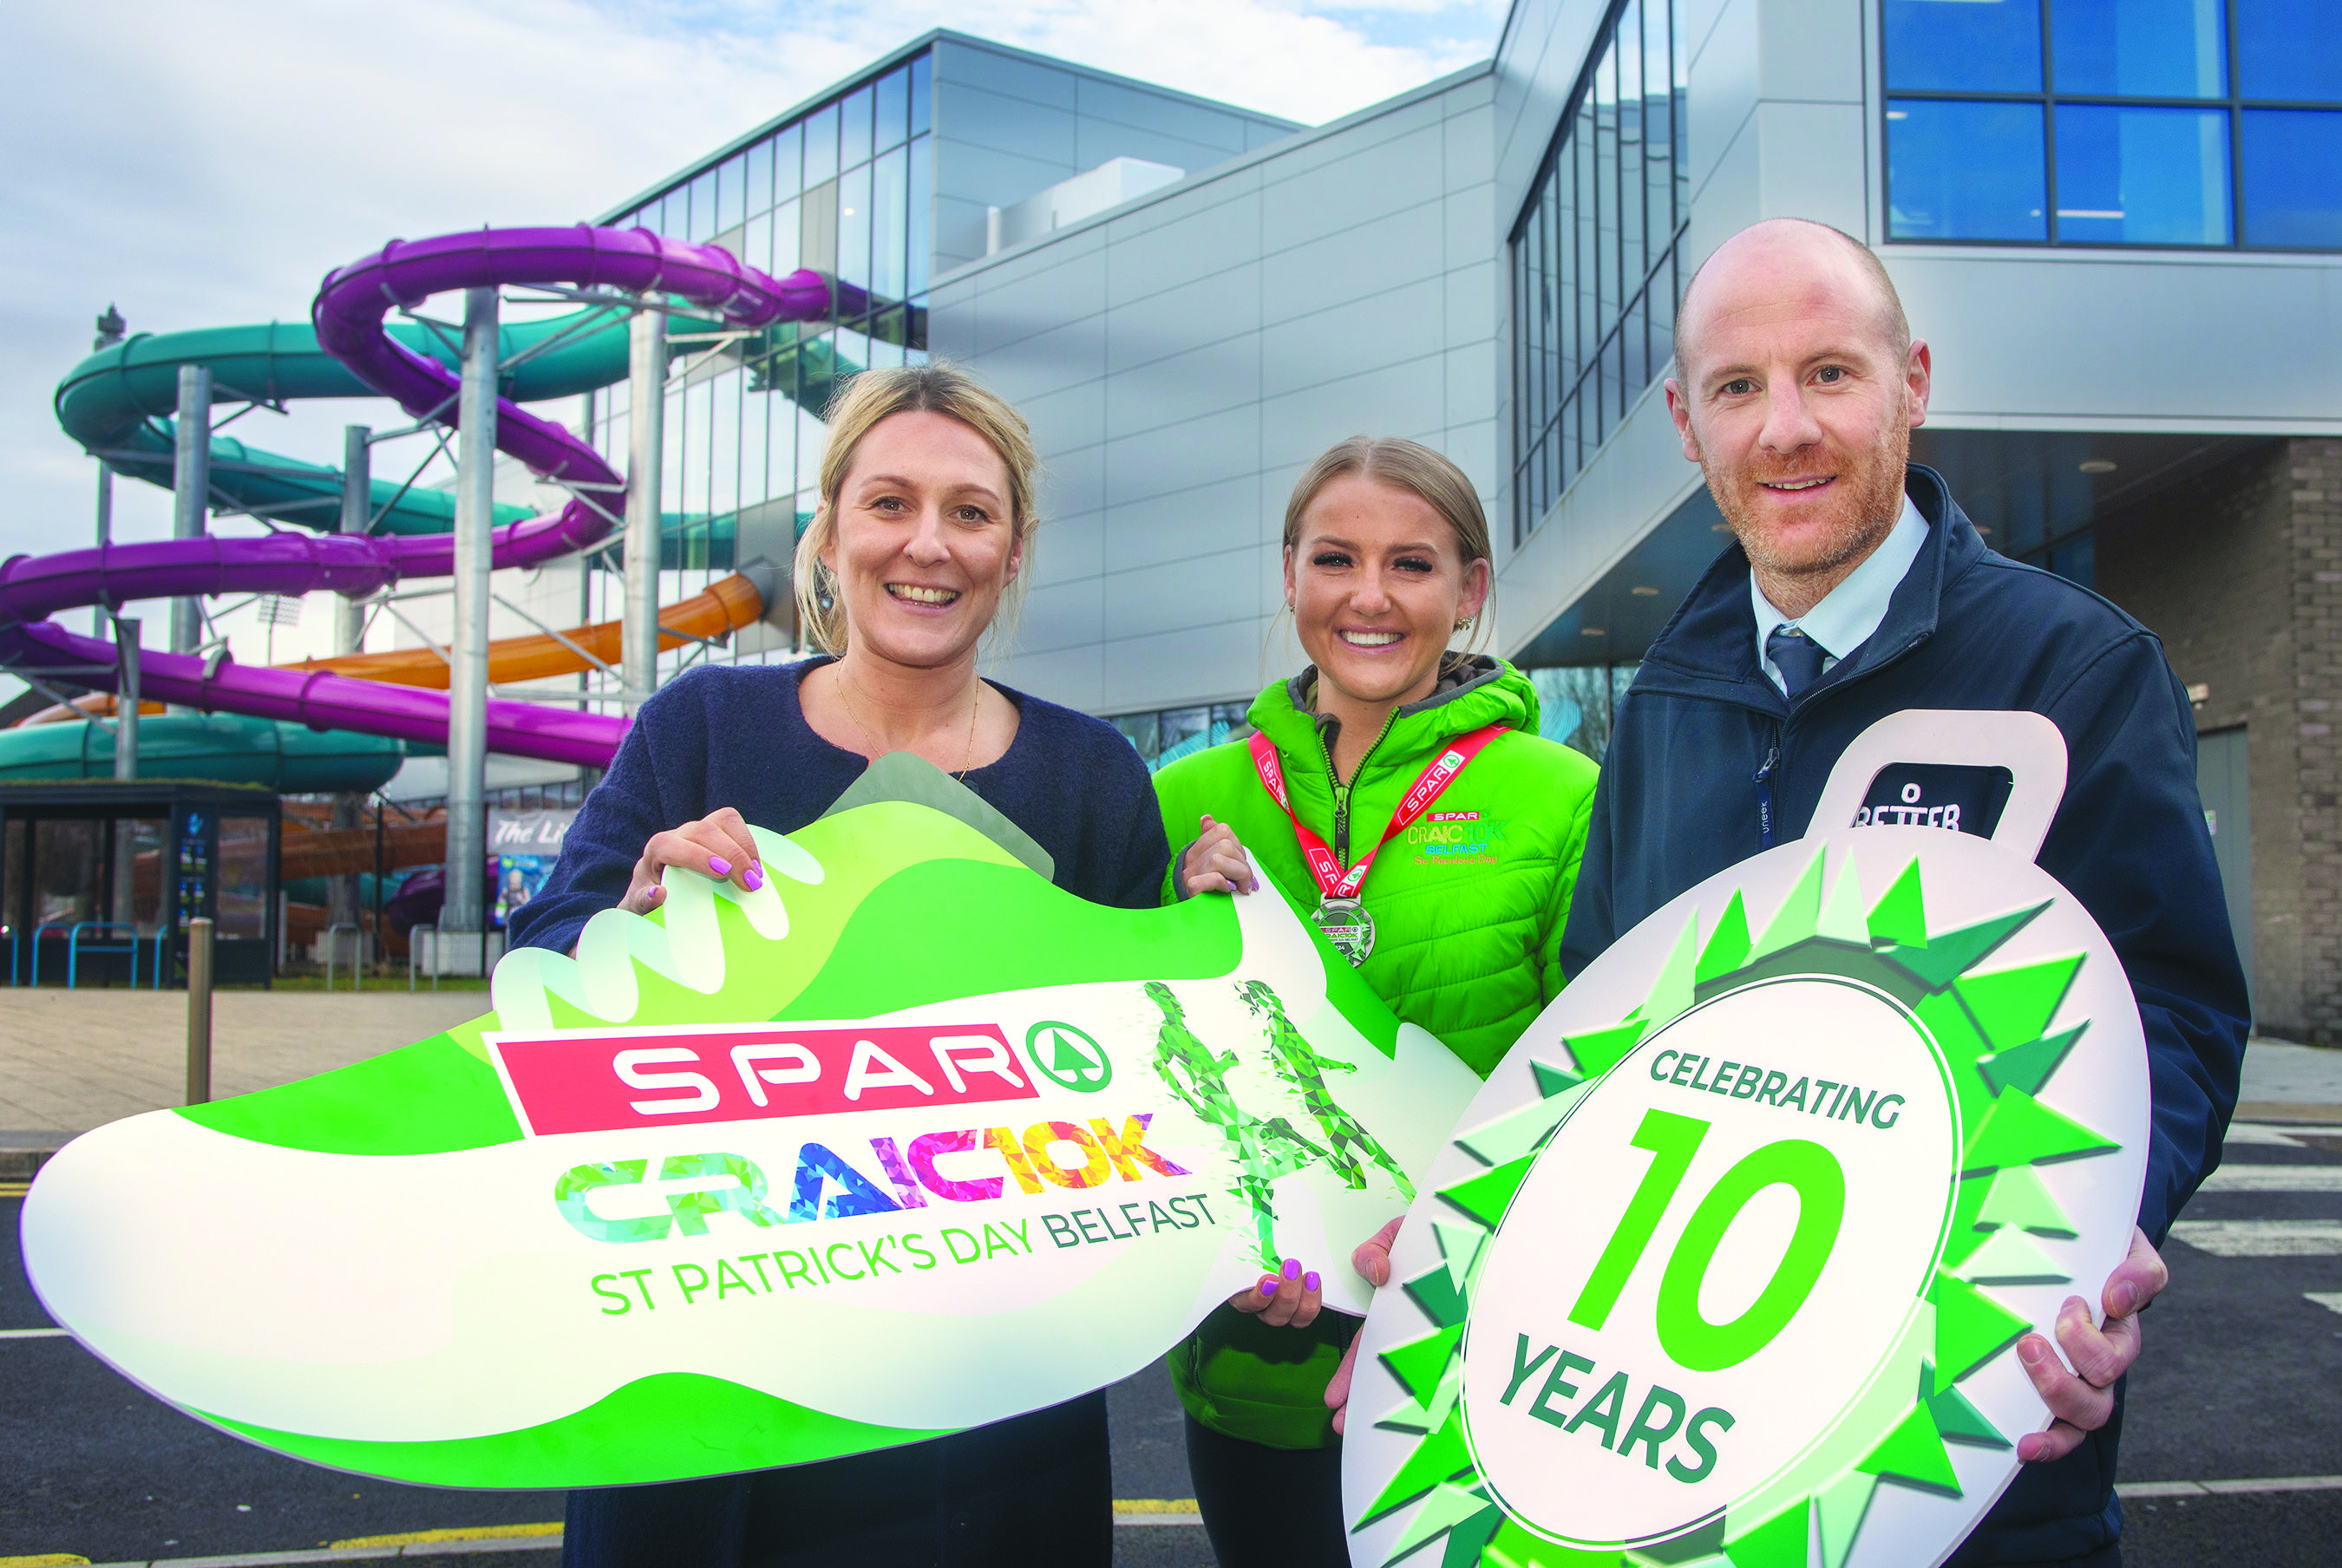 Roma Doherty, General Manager at Grove Wellbeing Centre; Amy Dickinson, SPAR Craic 10k Events Coordinator and Aaron McGlone, General Manager at Falls Leisure Centre